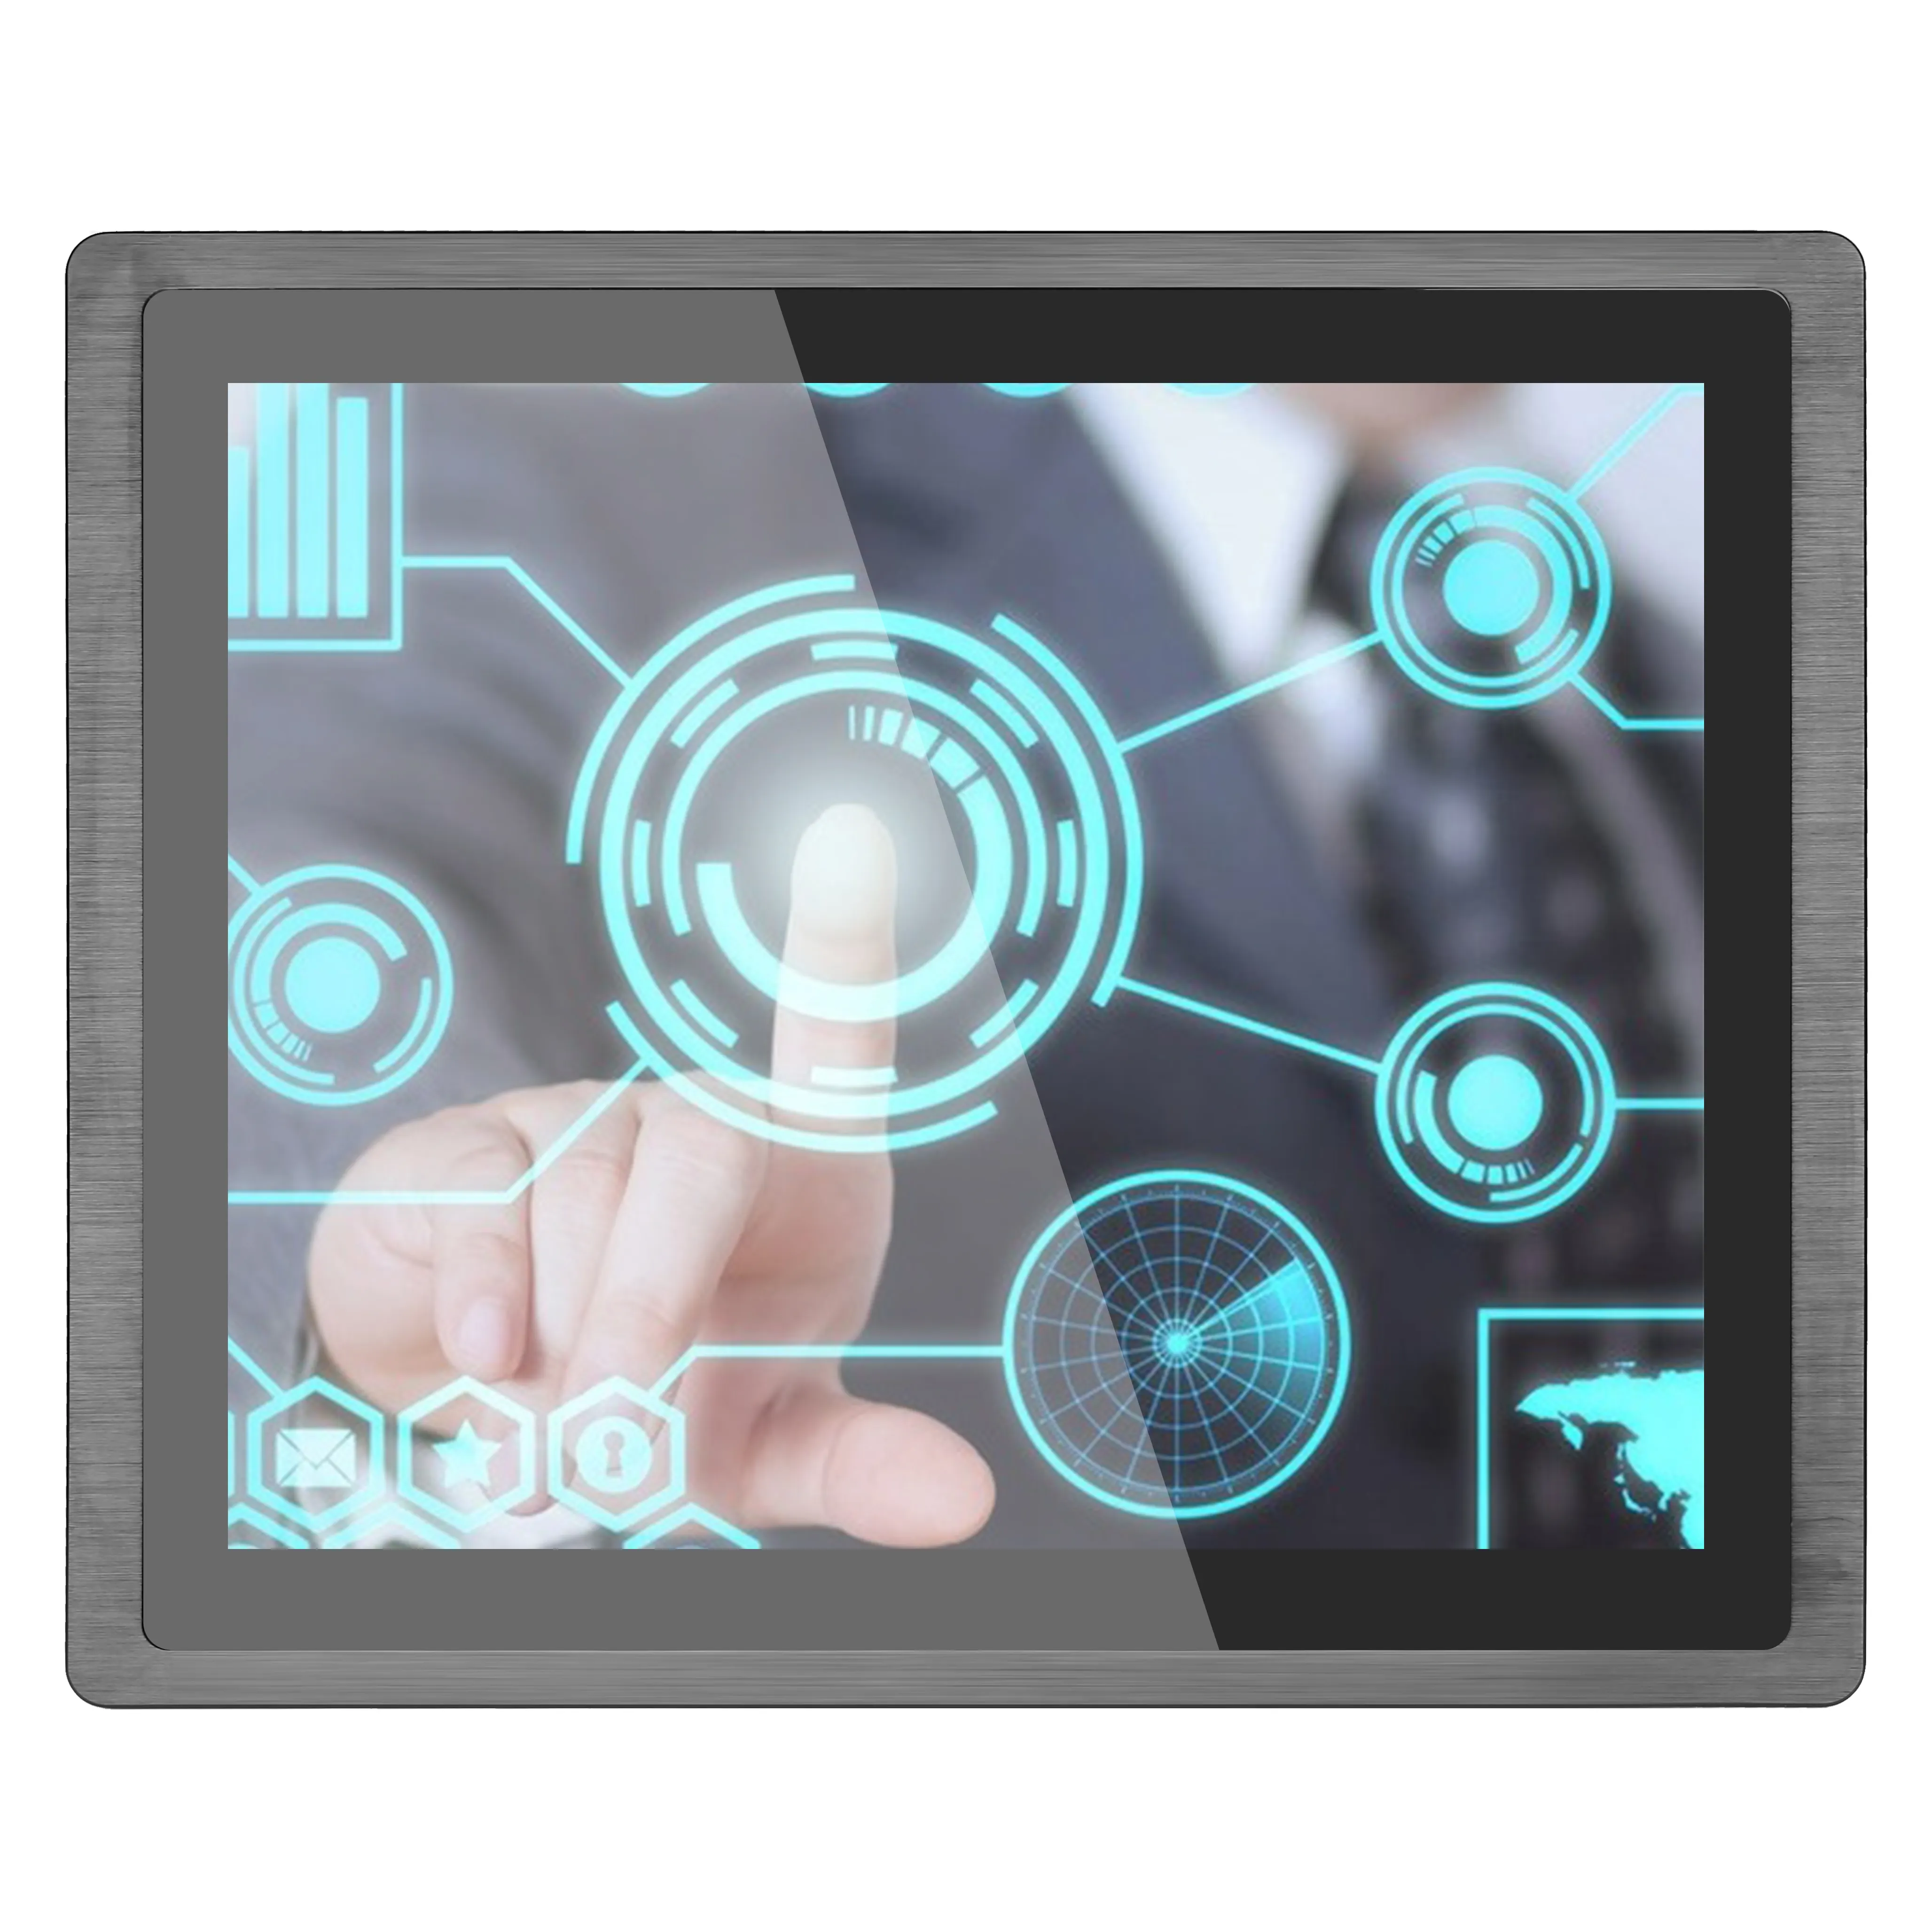 10.4" 12" 15" 17" 19" square industrial grade lcd touch screen monitor 15 inch embedded panel mount monitor with dvi/vga/hdm-i